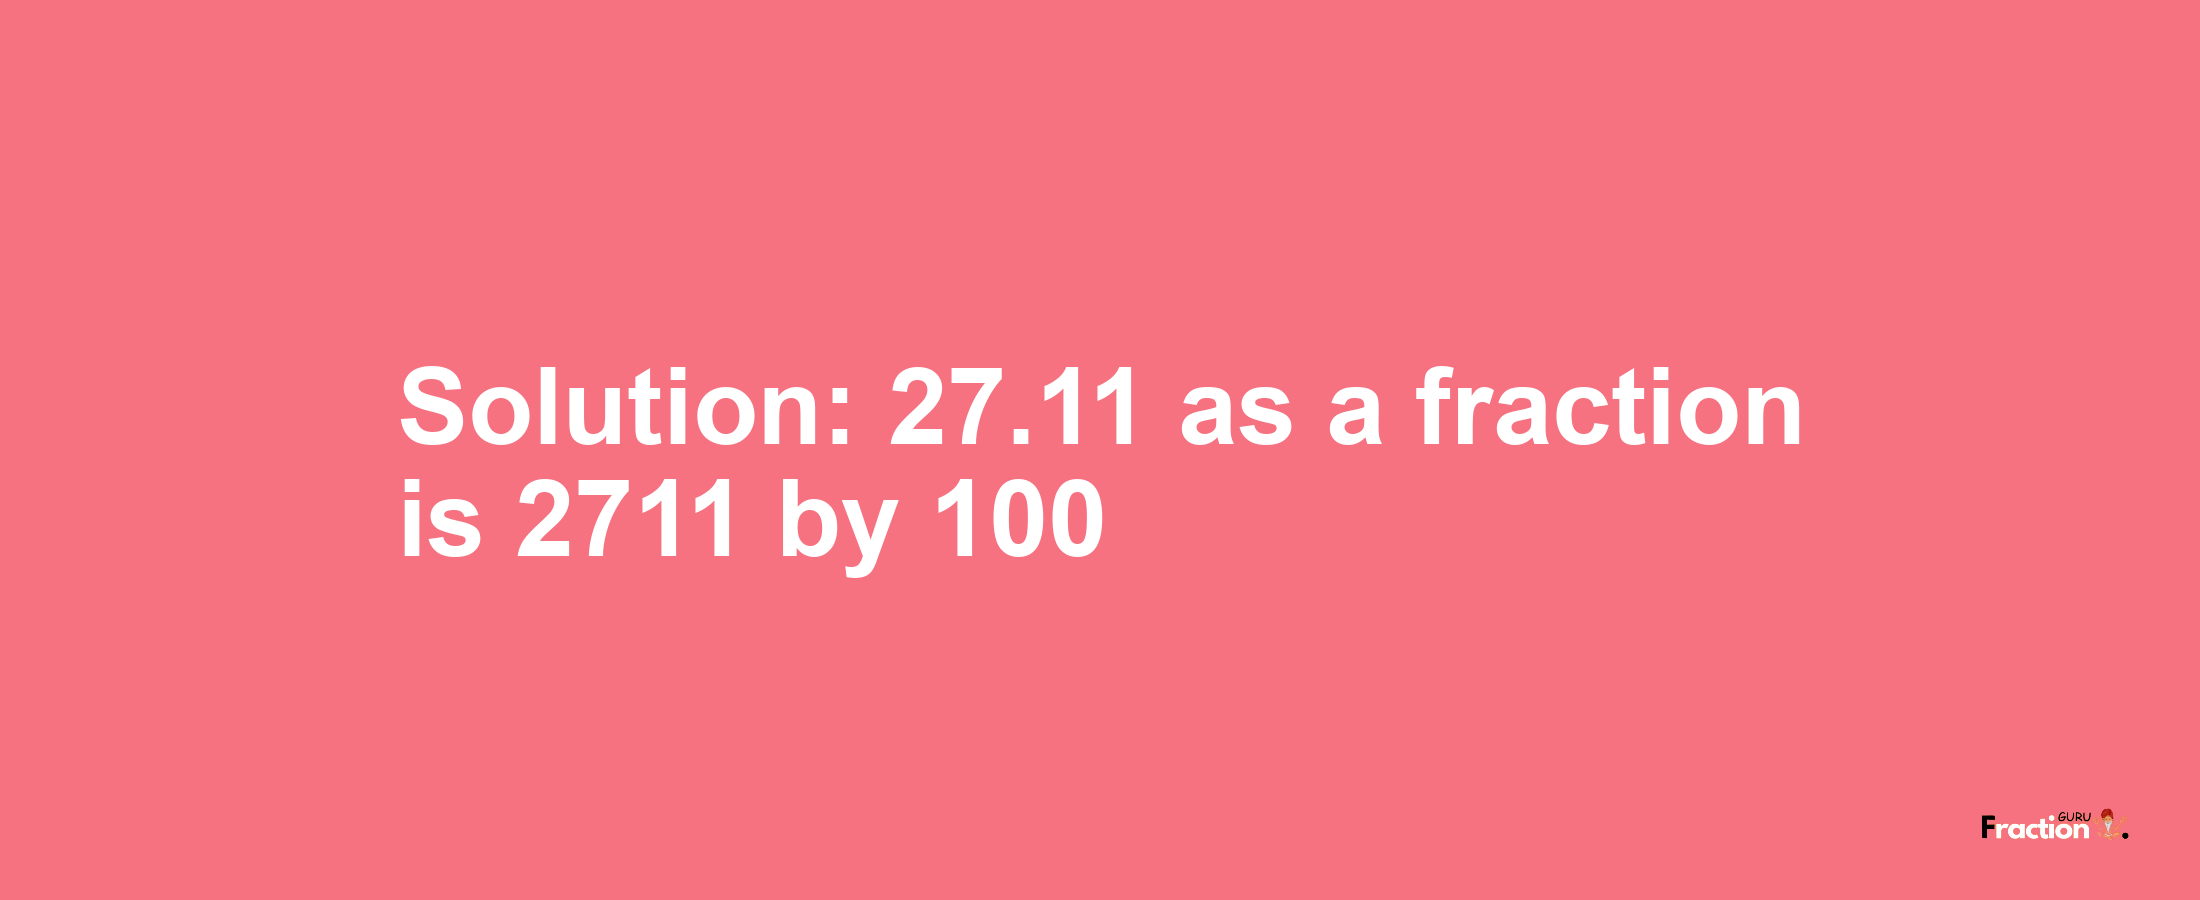 Solution:27.11 as a fraction is 2711/100